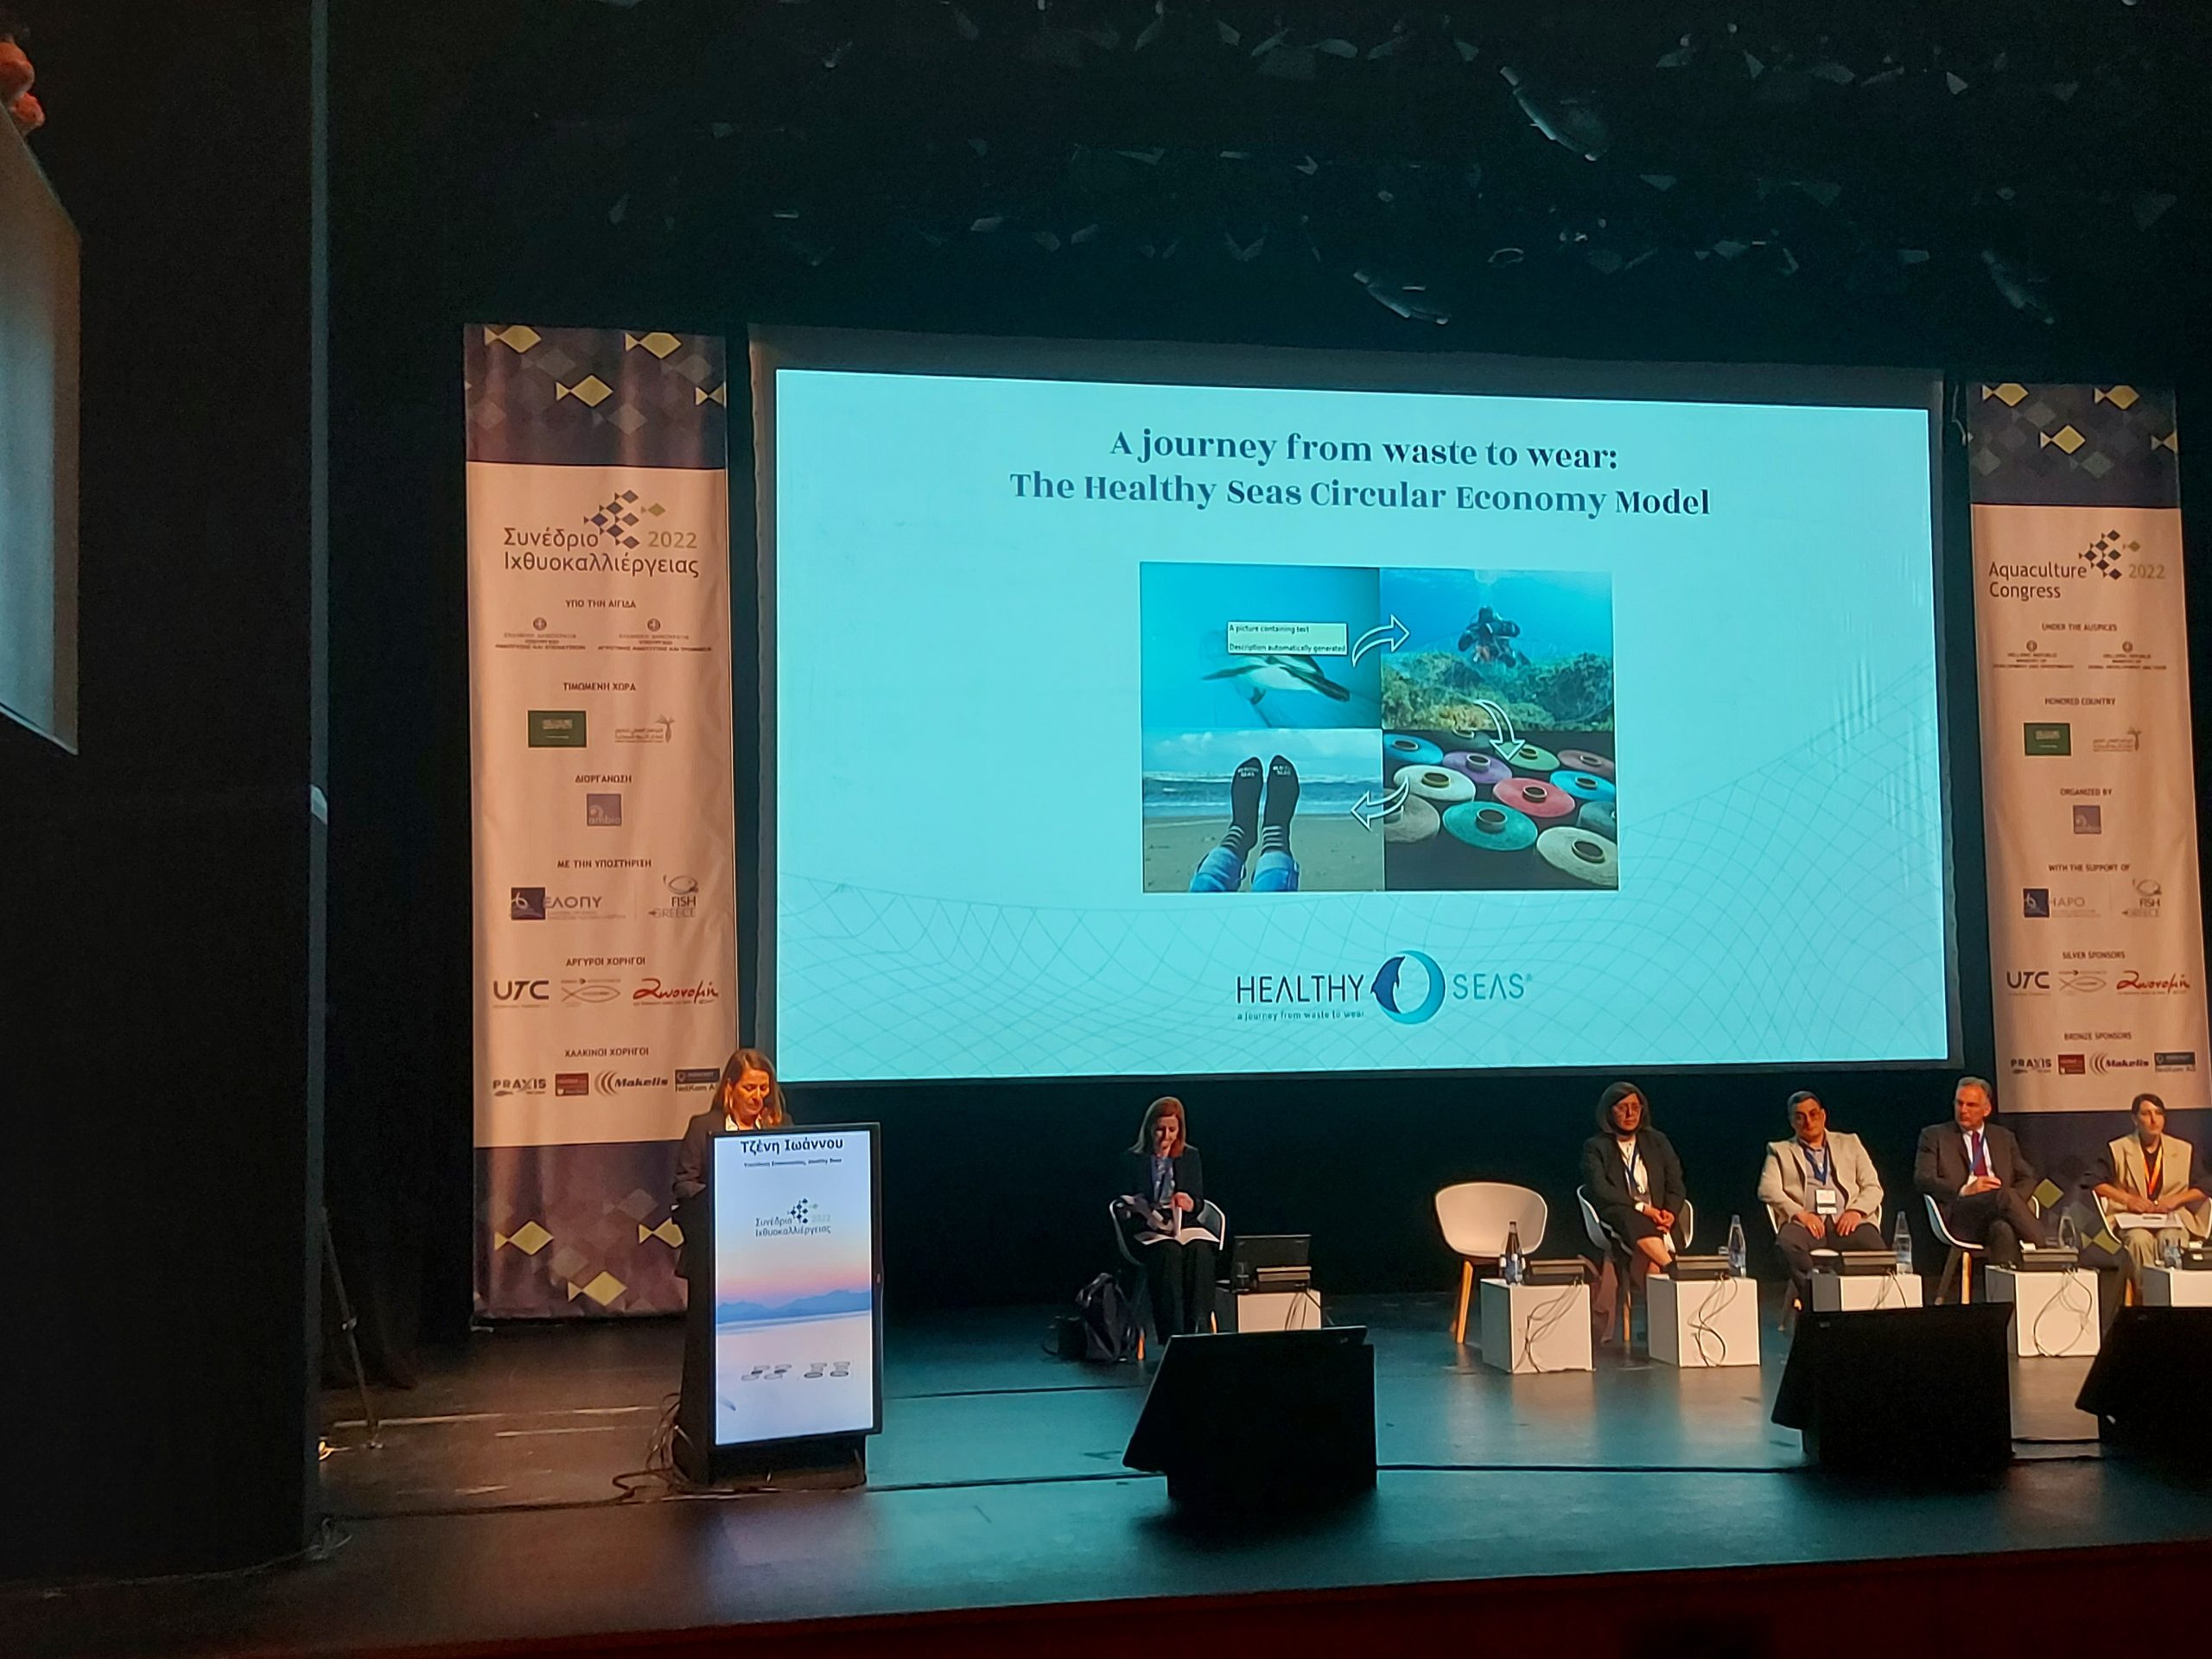 Healthy Seas at the 2nd Aquaculture Congress in Athens